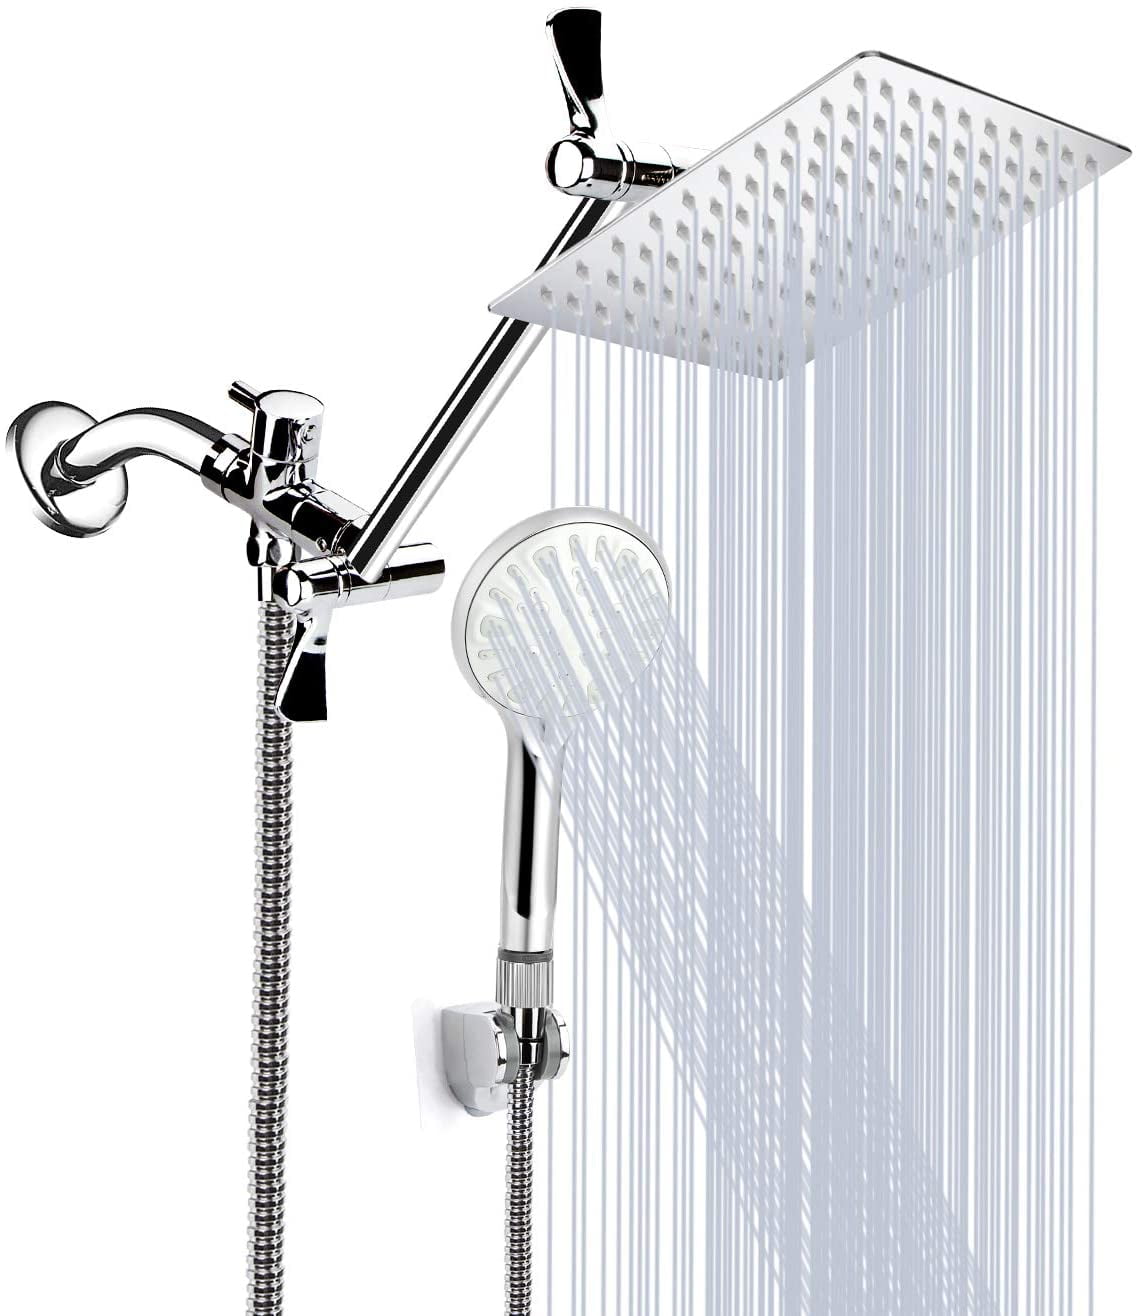 High Pressure 8'' Rainfall Stainless Steel Shower Head/Handheld Shower with ON/OFF Pause Switch Shower Combo with hose,Adhesive Shower Head Holder Shower Head with handheld 